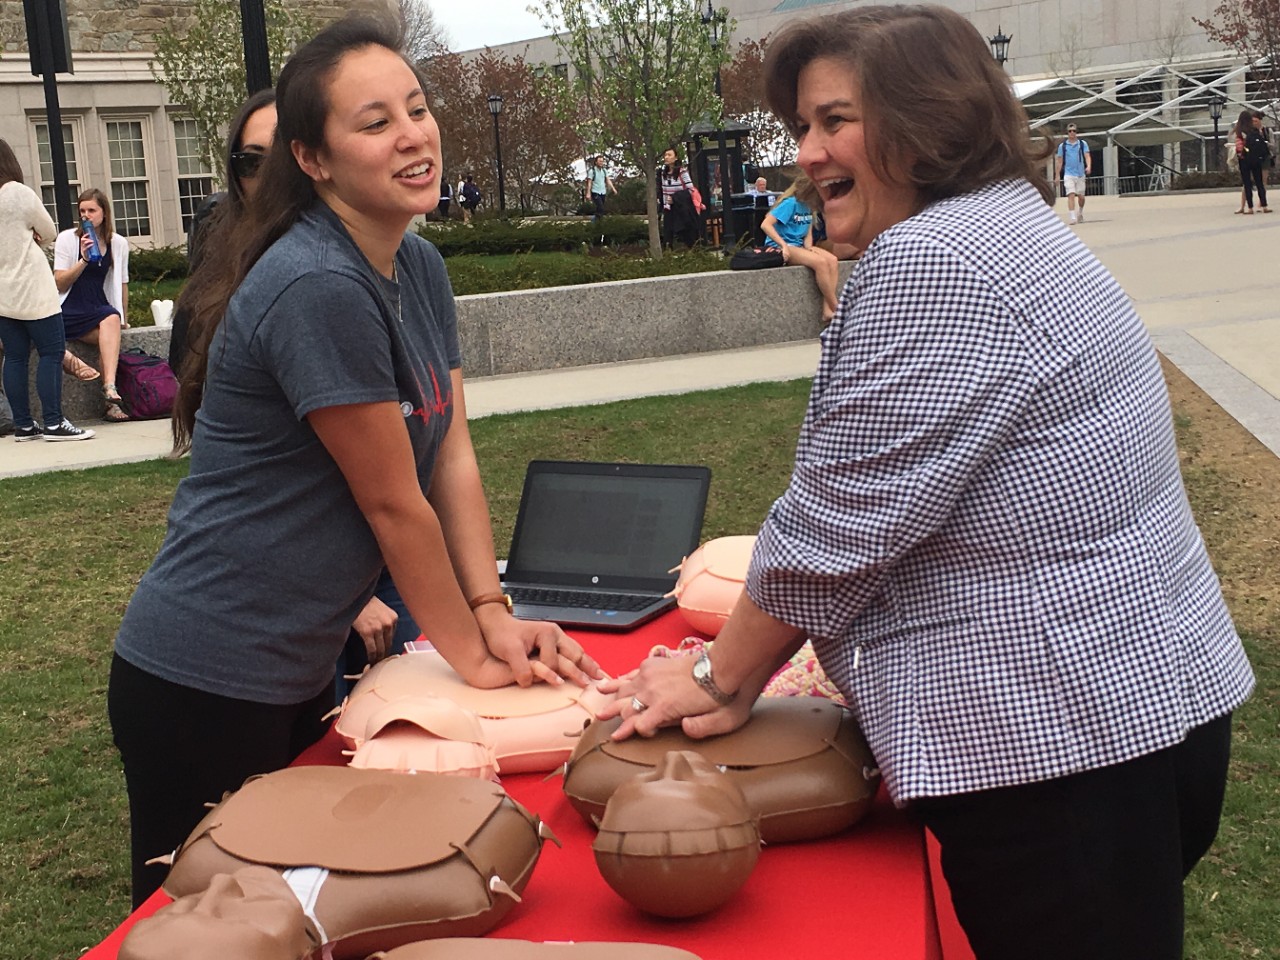 Sydney Conti demonstrates compressions to a passing faculty member